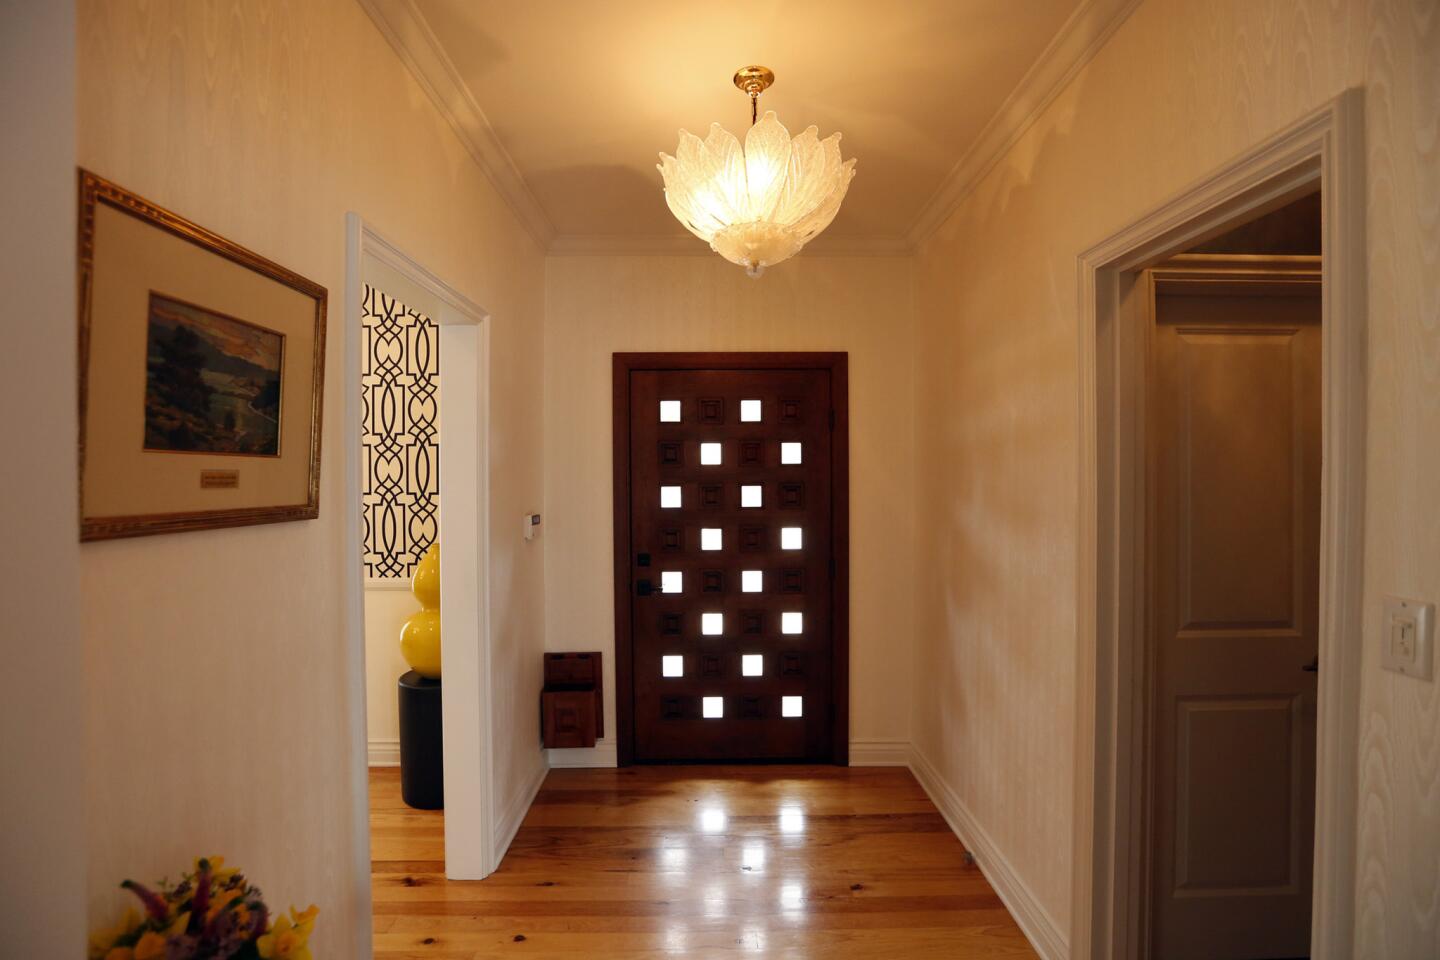 The entryway includes another Murano glass lighting fixture as well as a wood door with glass placed